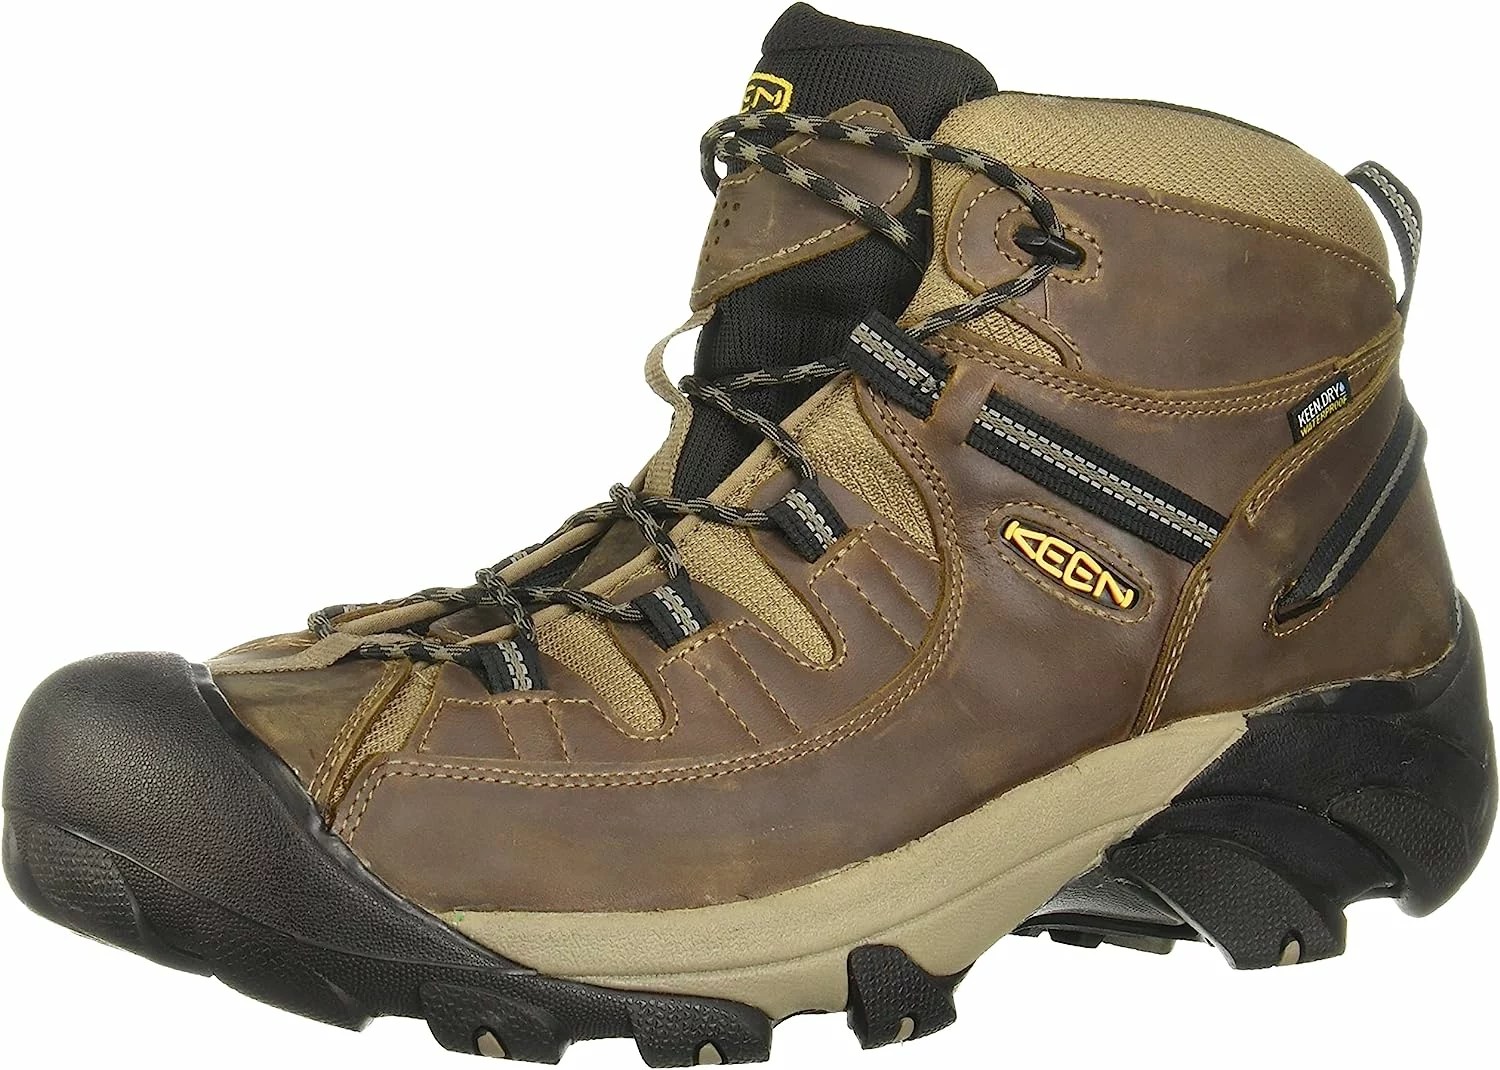 KEEN Targhee 2 Hiking Boots, best sneakers for ankle support